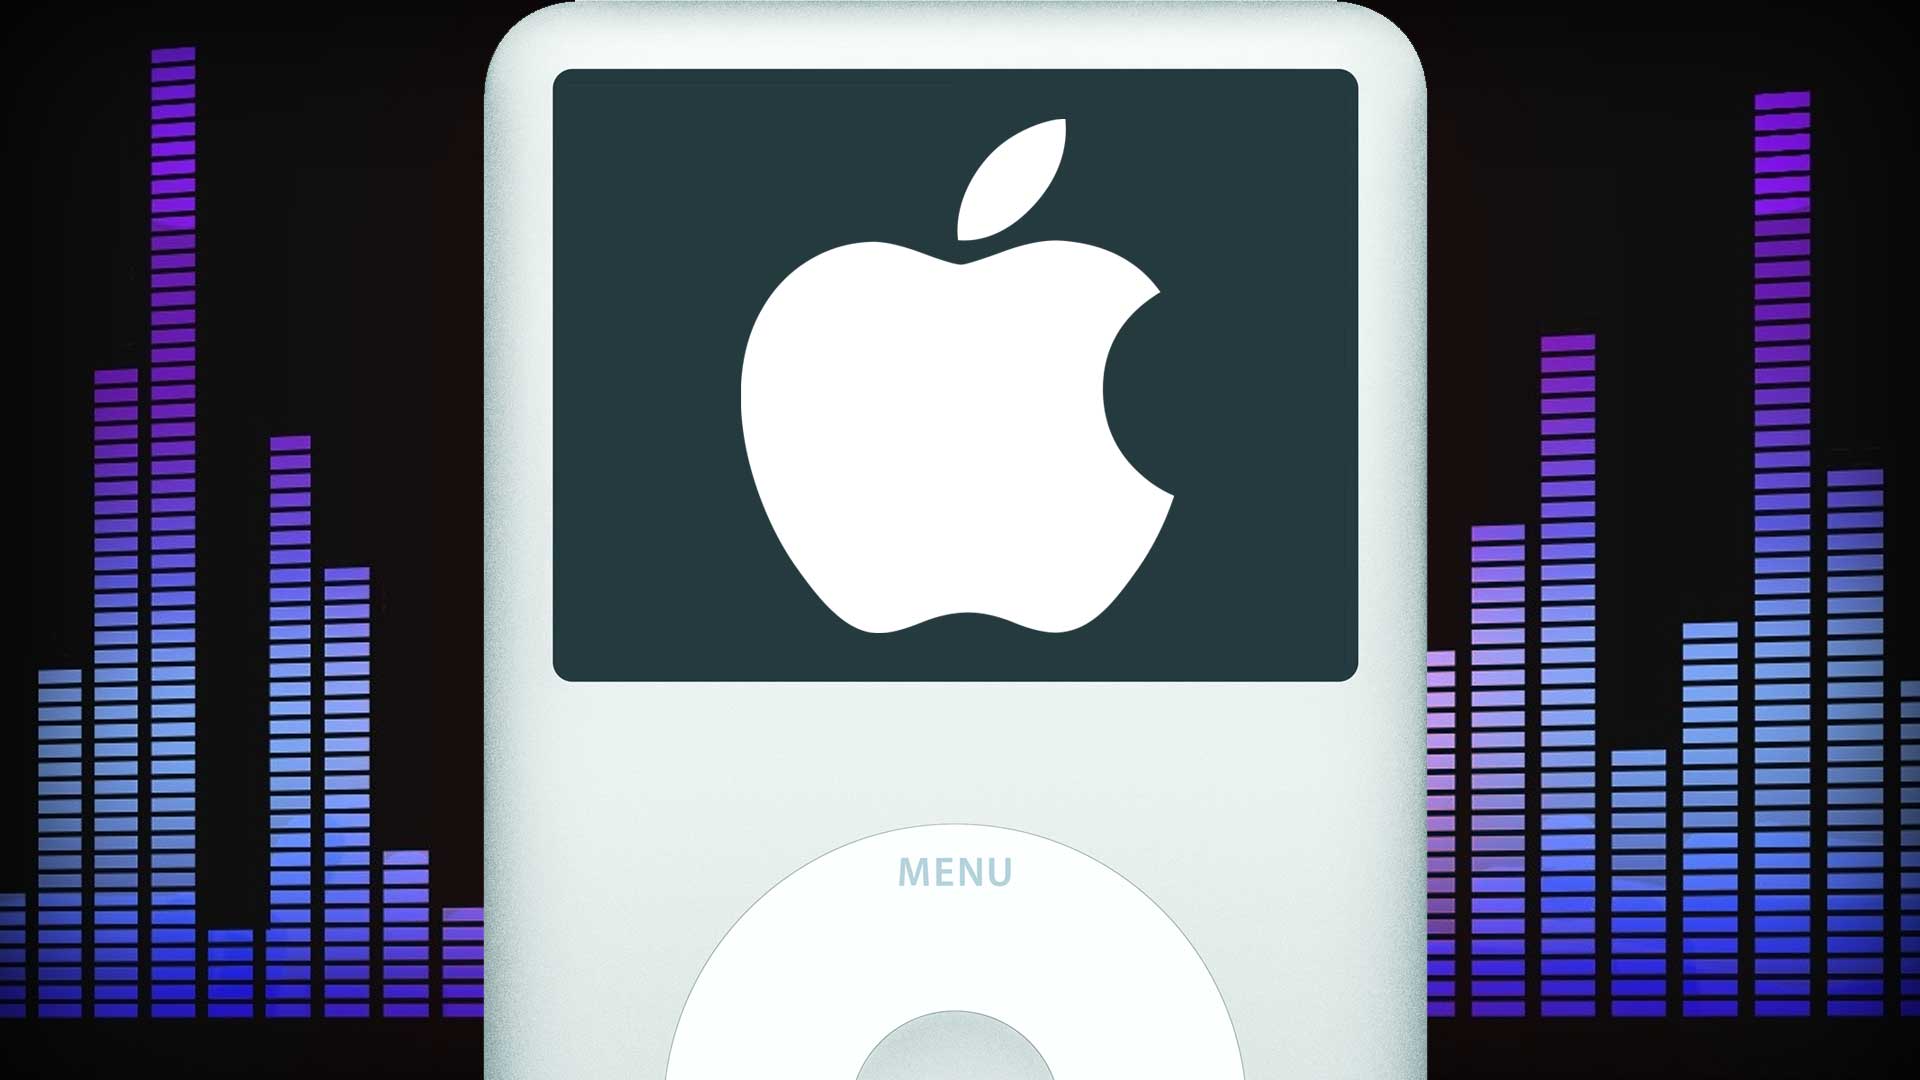 Will Sticker Shock Hurt Apple's Expansion Of The iPod Into Europe?